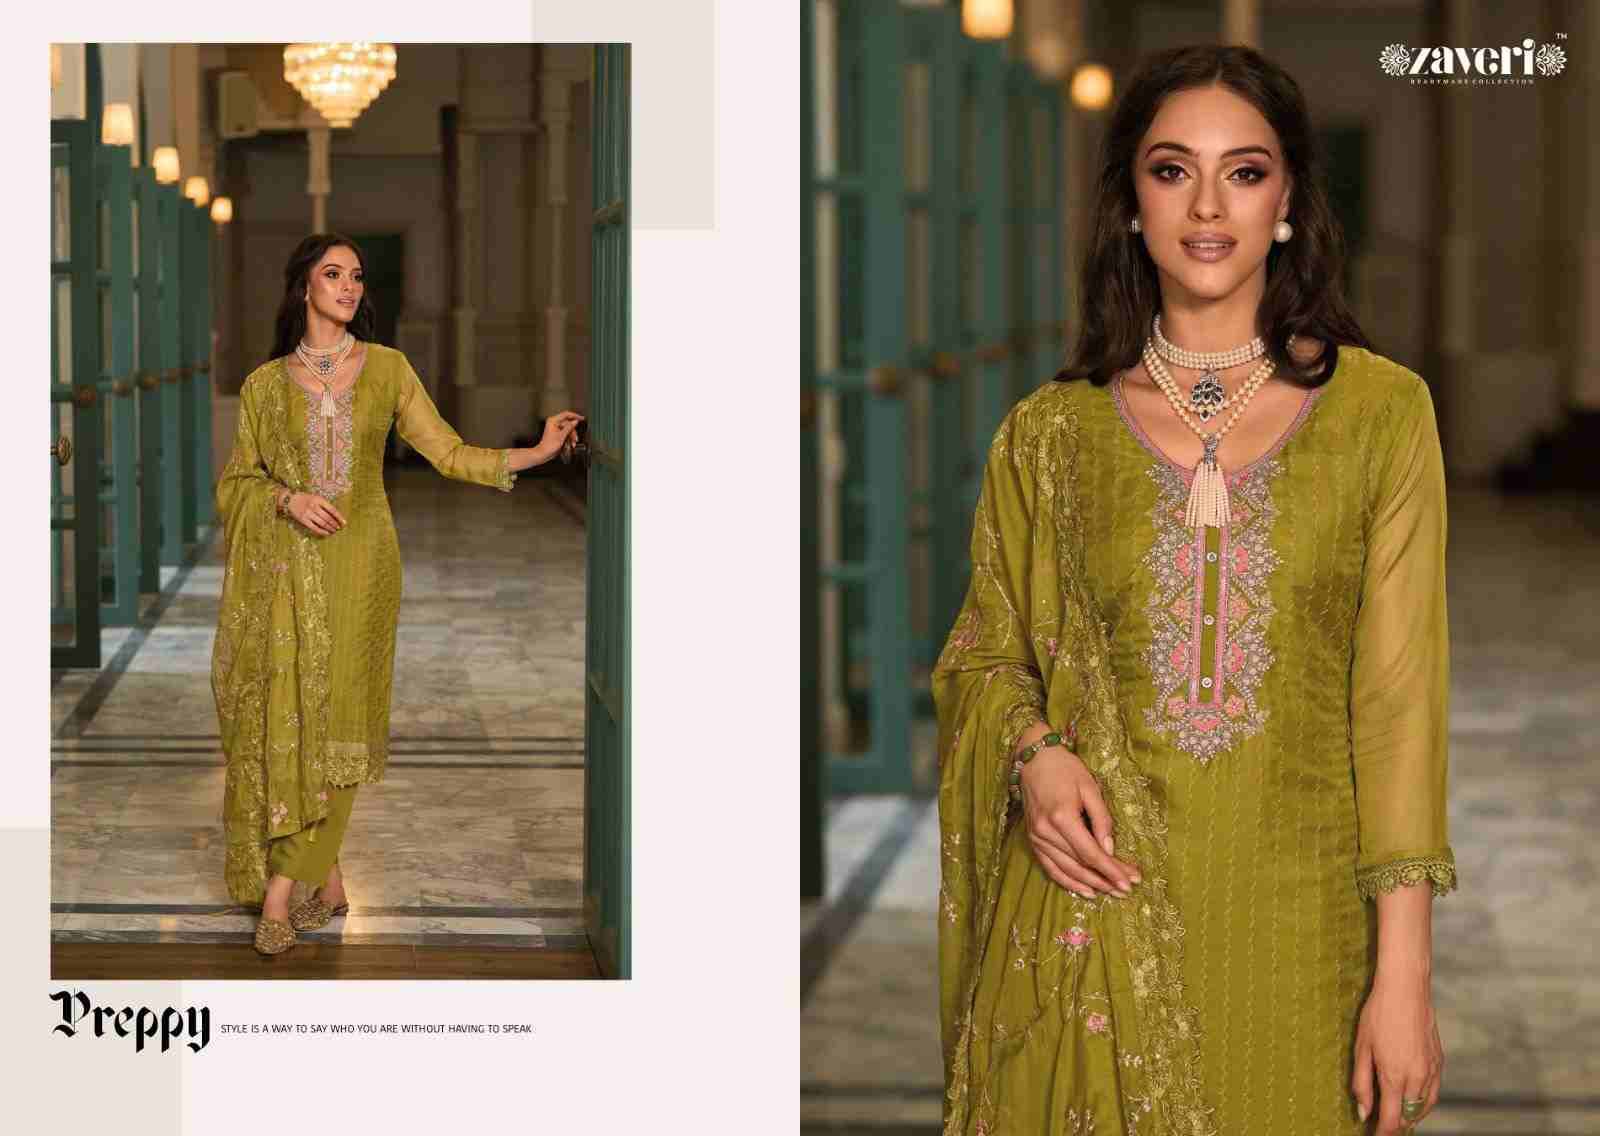 Jil-Mil Vol-2 By Zaveri 1237 To 1239 Series Designer Festive Suits Beautiful Fancy Colorful Stylish Party Wear & Occasional Wear Soft Organza Dresses At Wholesale Price